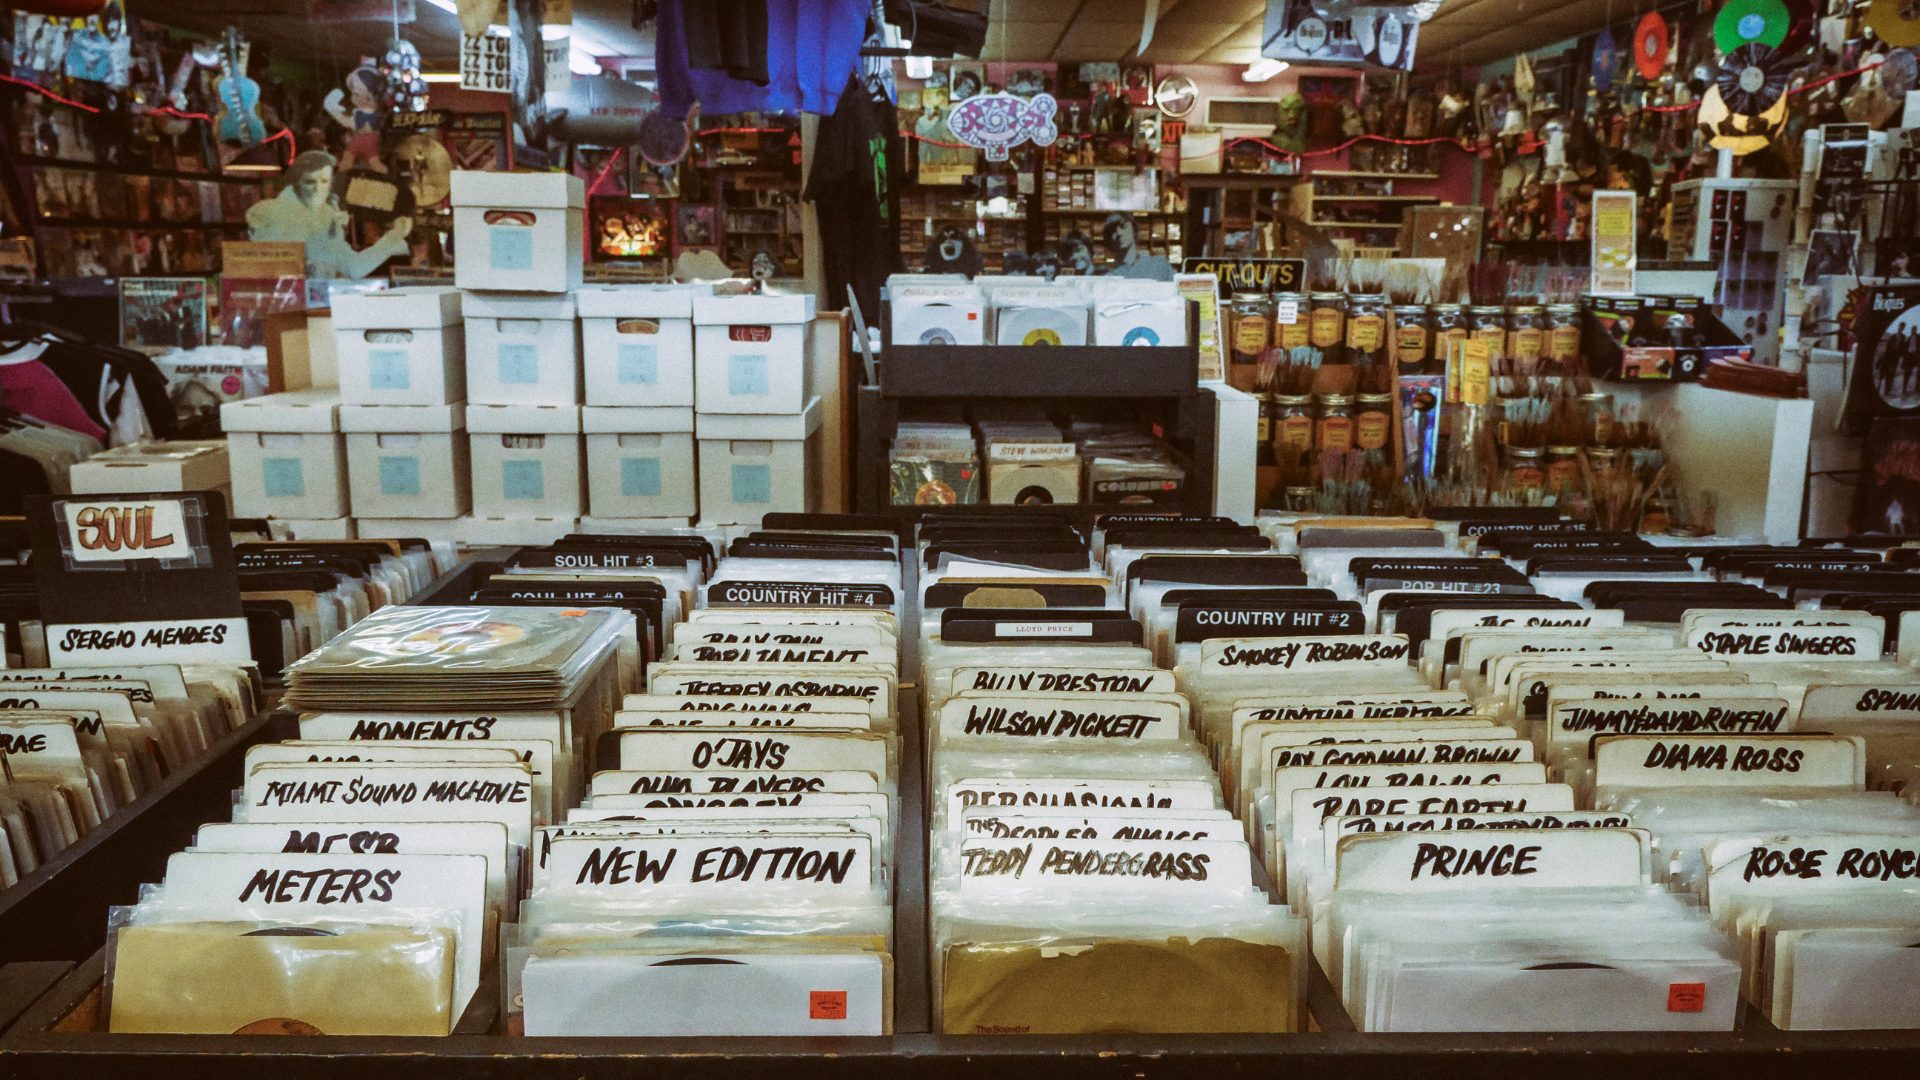 https://www.pexels.com/photo/a-vinyl-records-in-the-store-6131933/